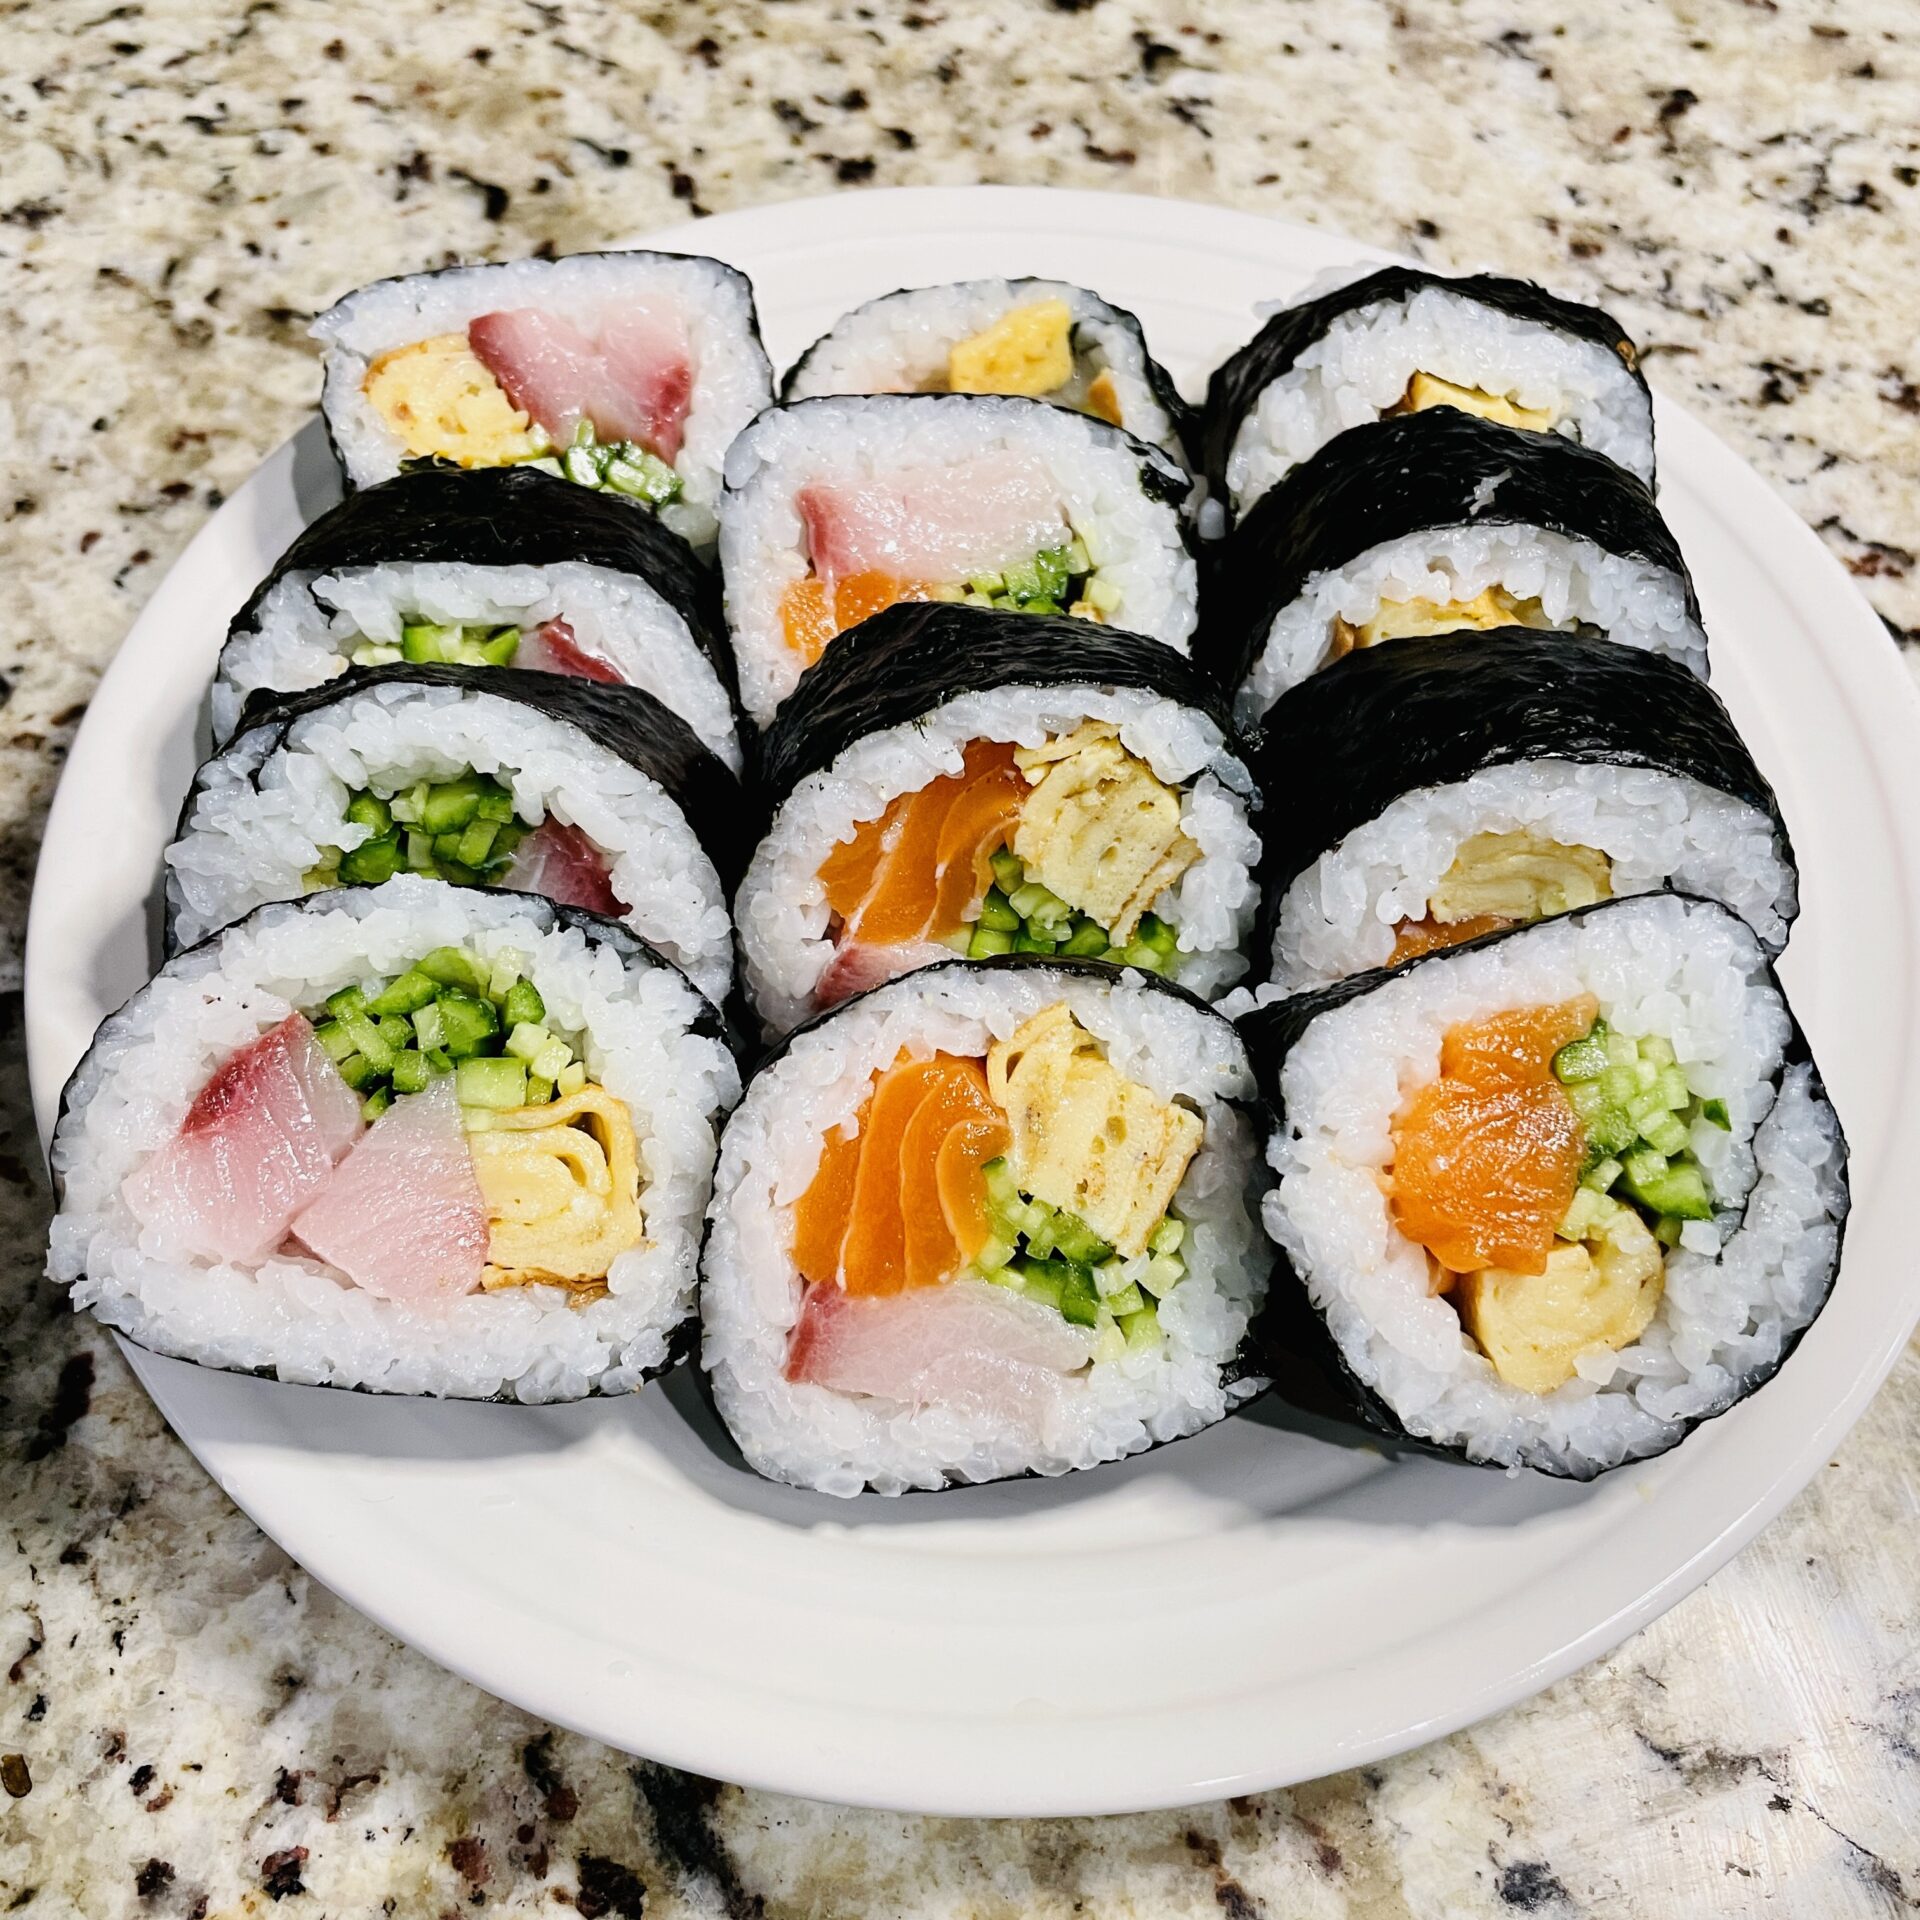 Making Sushi Is Easier Than You Think! (Homemade Sushi Rolls